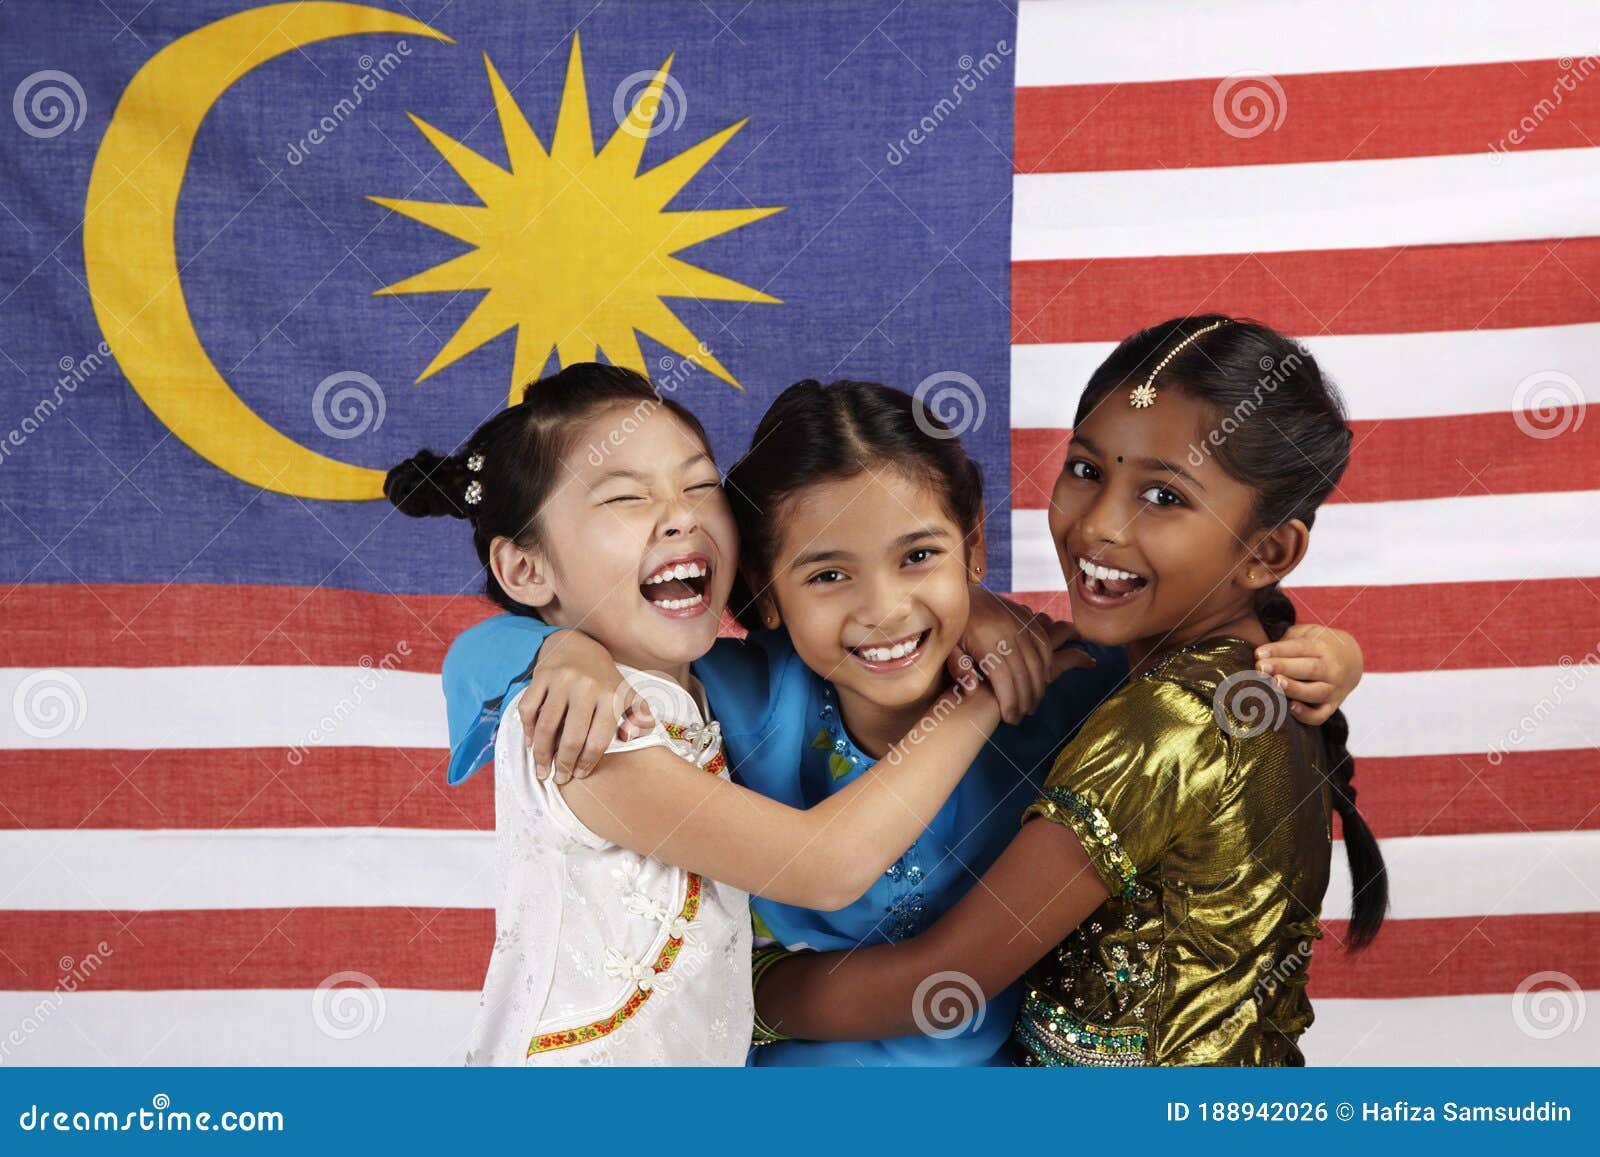 happy girls hugging each other with malaysian flag in the background. conceptual image